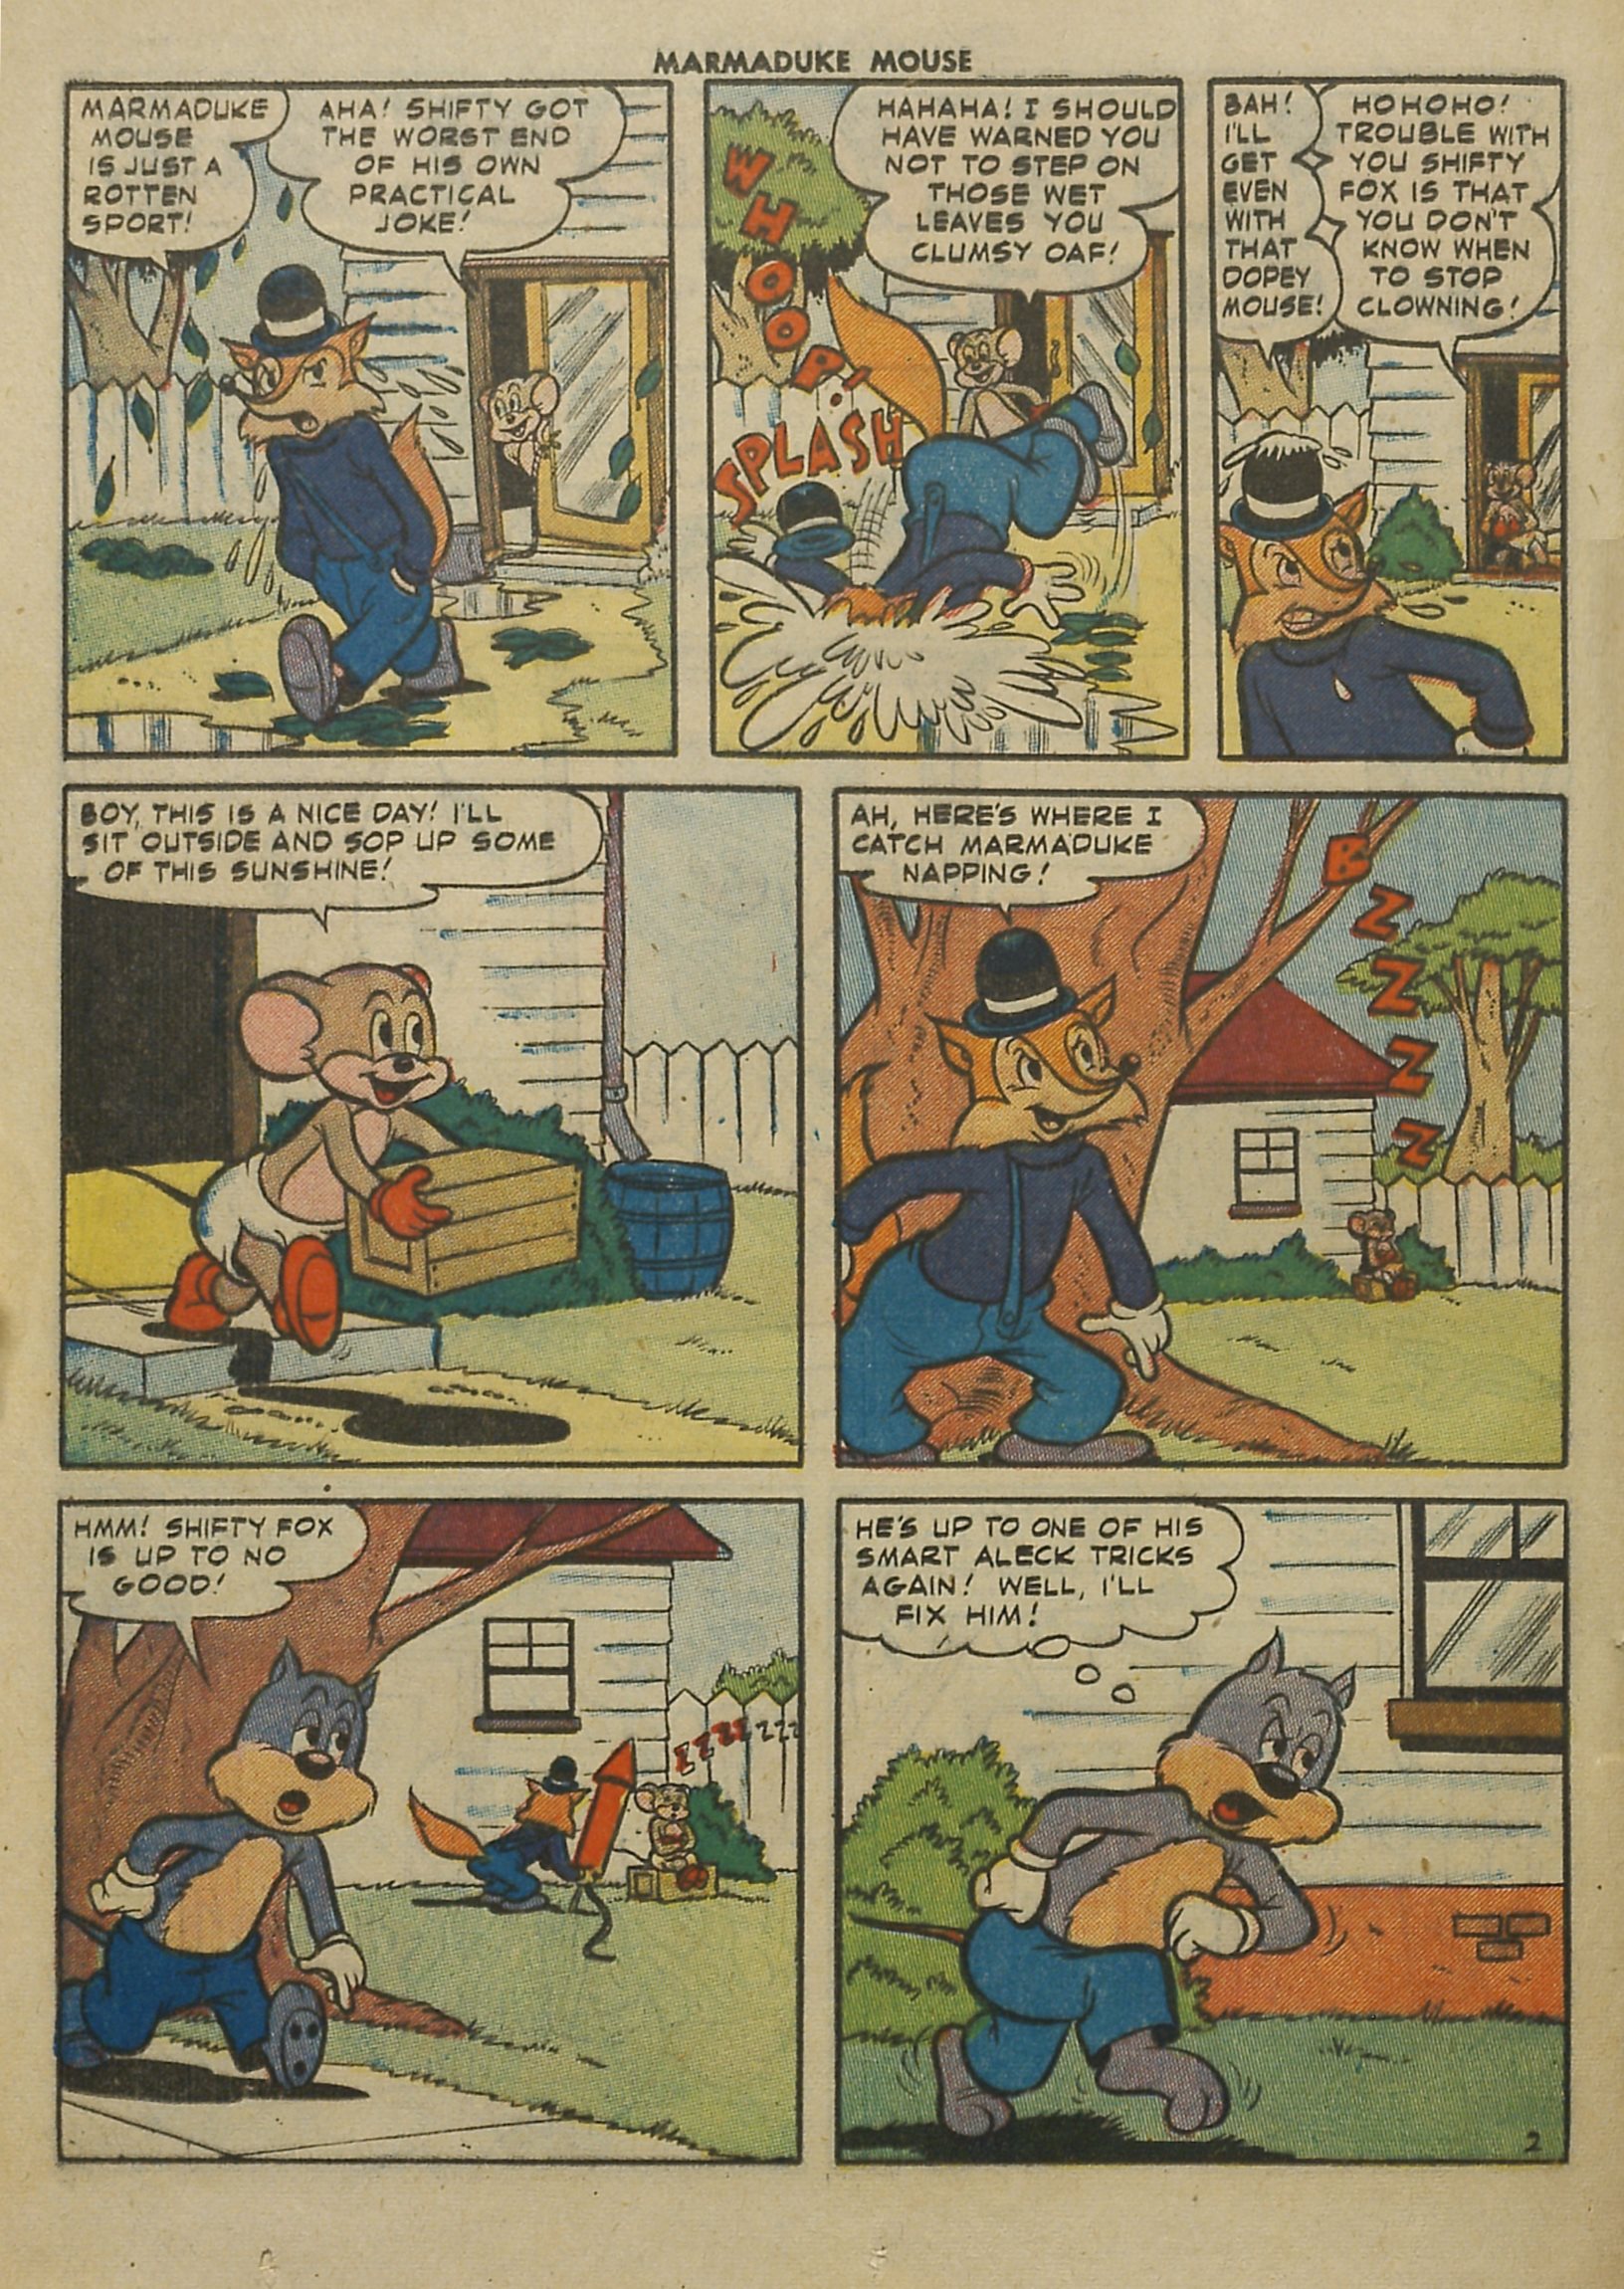 Read online Marmaduke Mouse comic -  Issue #45 - 20